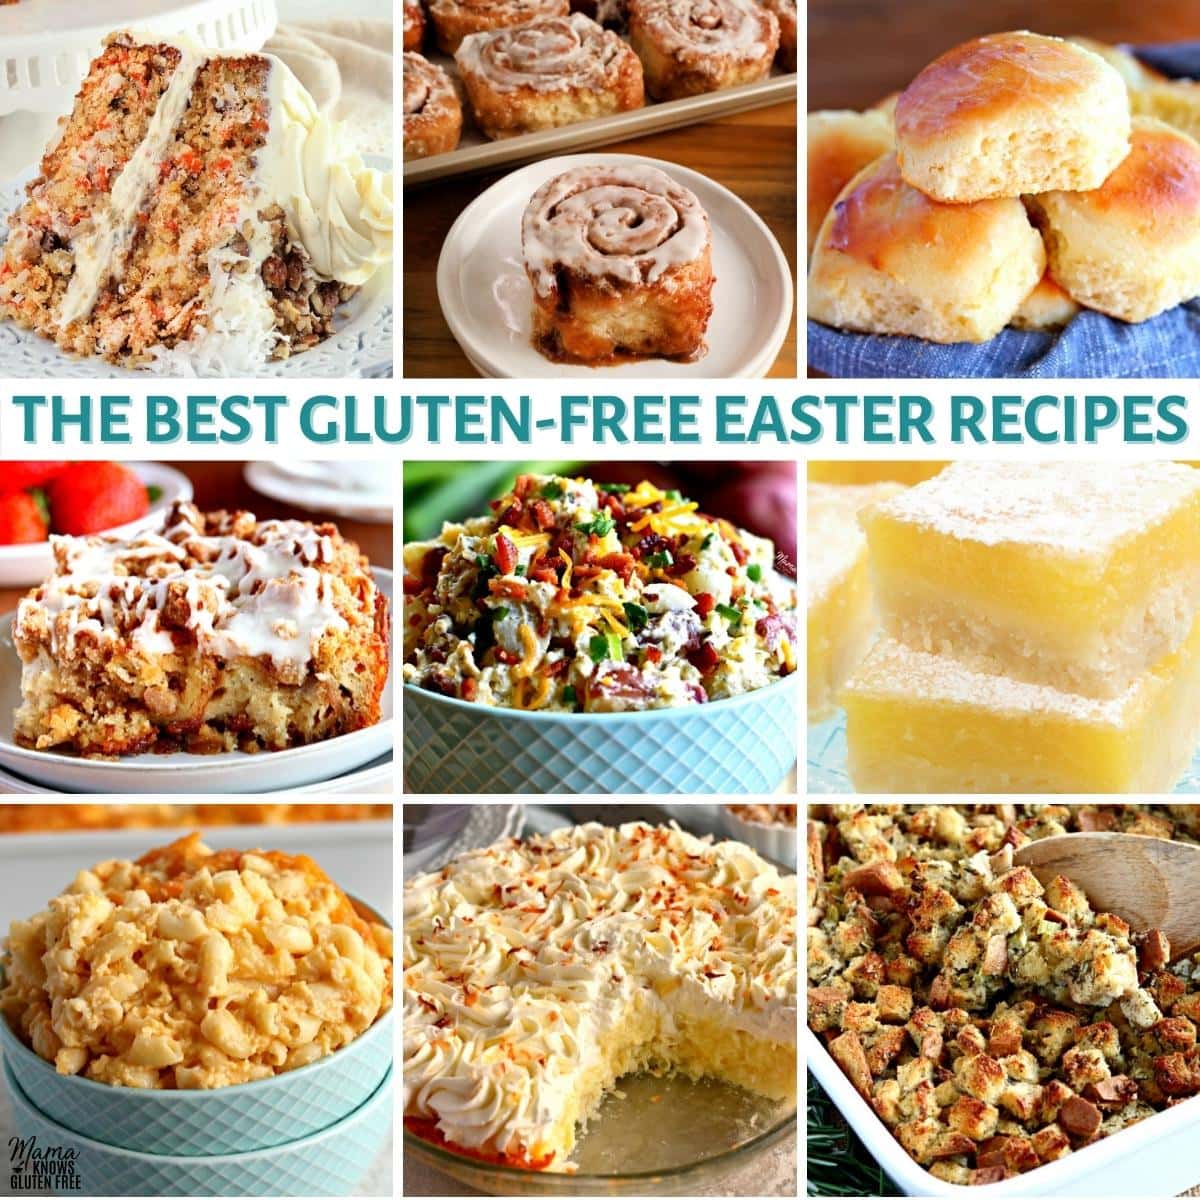 gluten-free Easter recipes photo collage